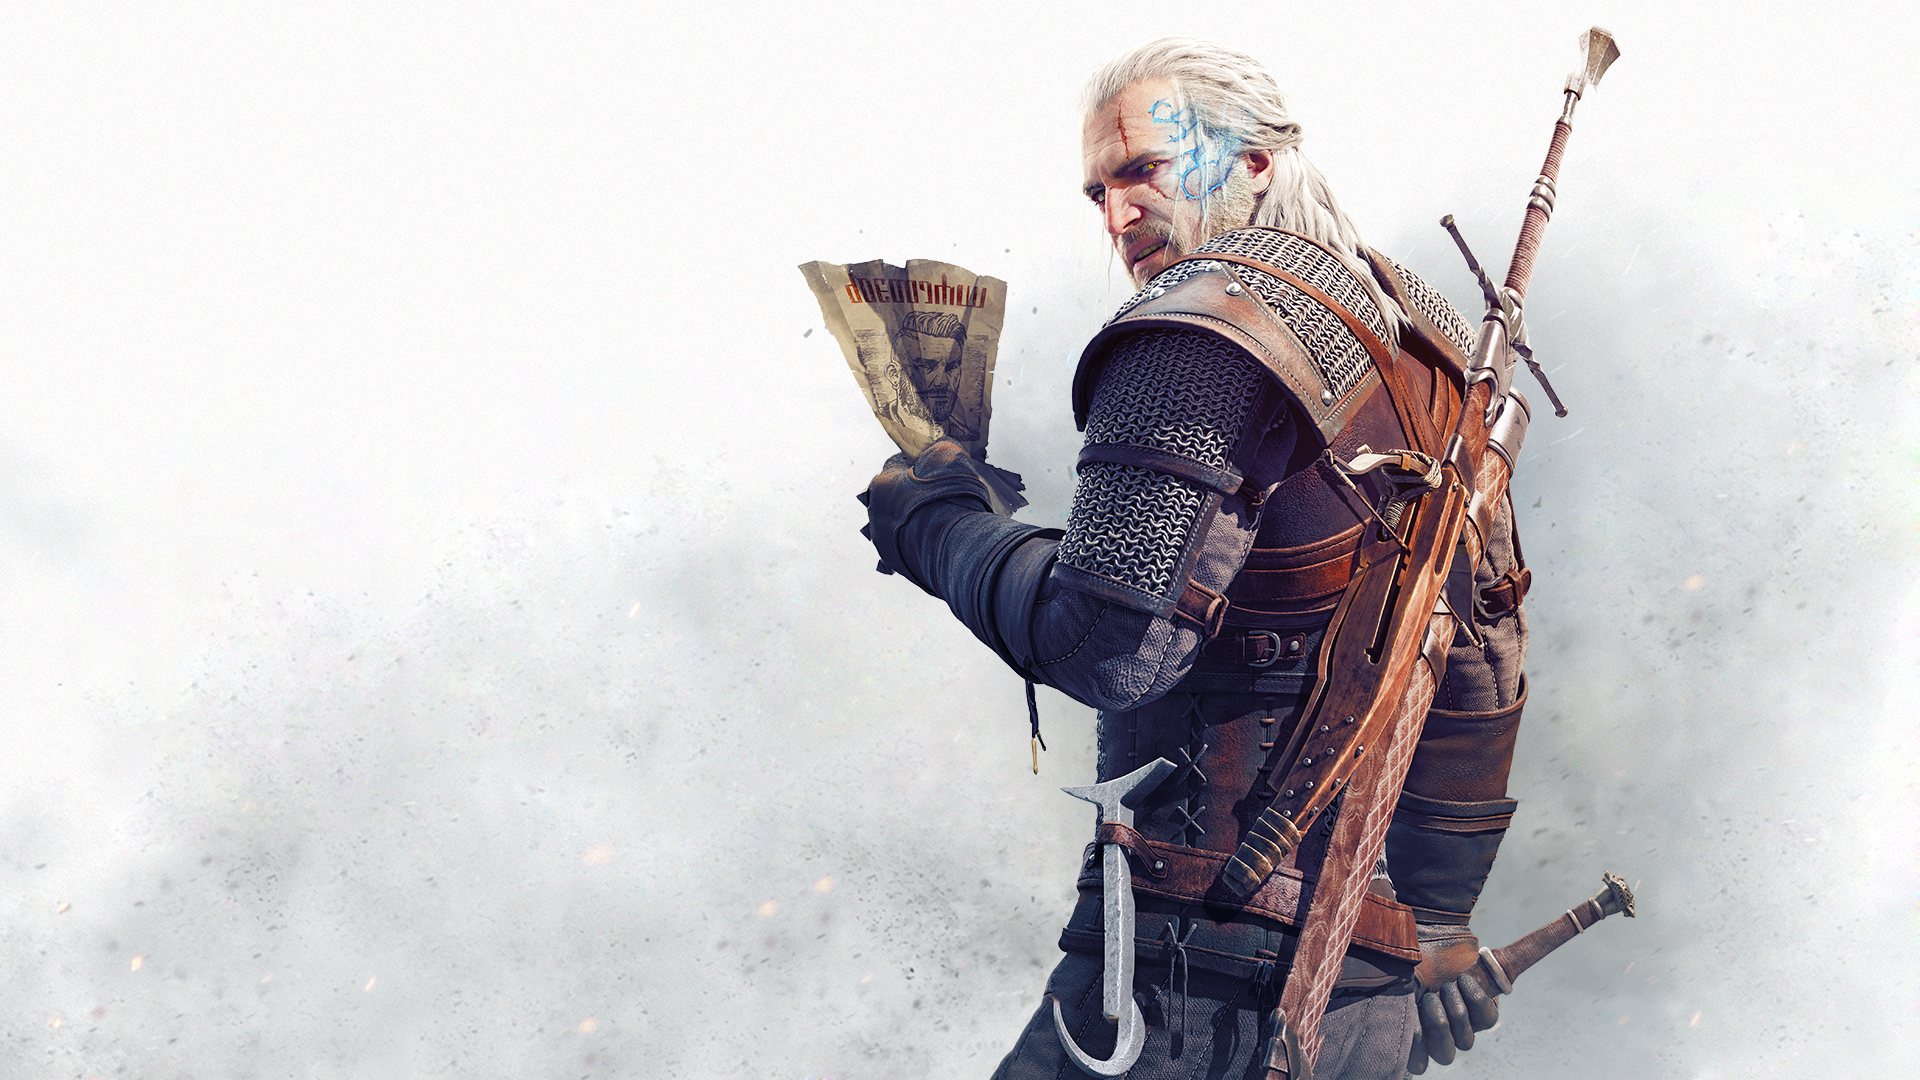 General 1920x1080 The Witcher 3: Wild Hunt Video Game Heroes Geralt of Rivia sword video games video game art RPG The Witcher 3: Wild Hunt – Hearts of Stone video game men Wanted posters video game characters PC gaming